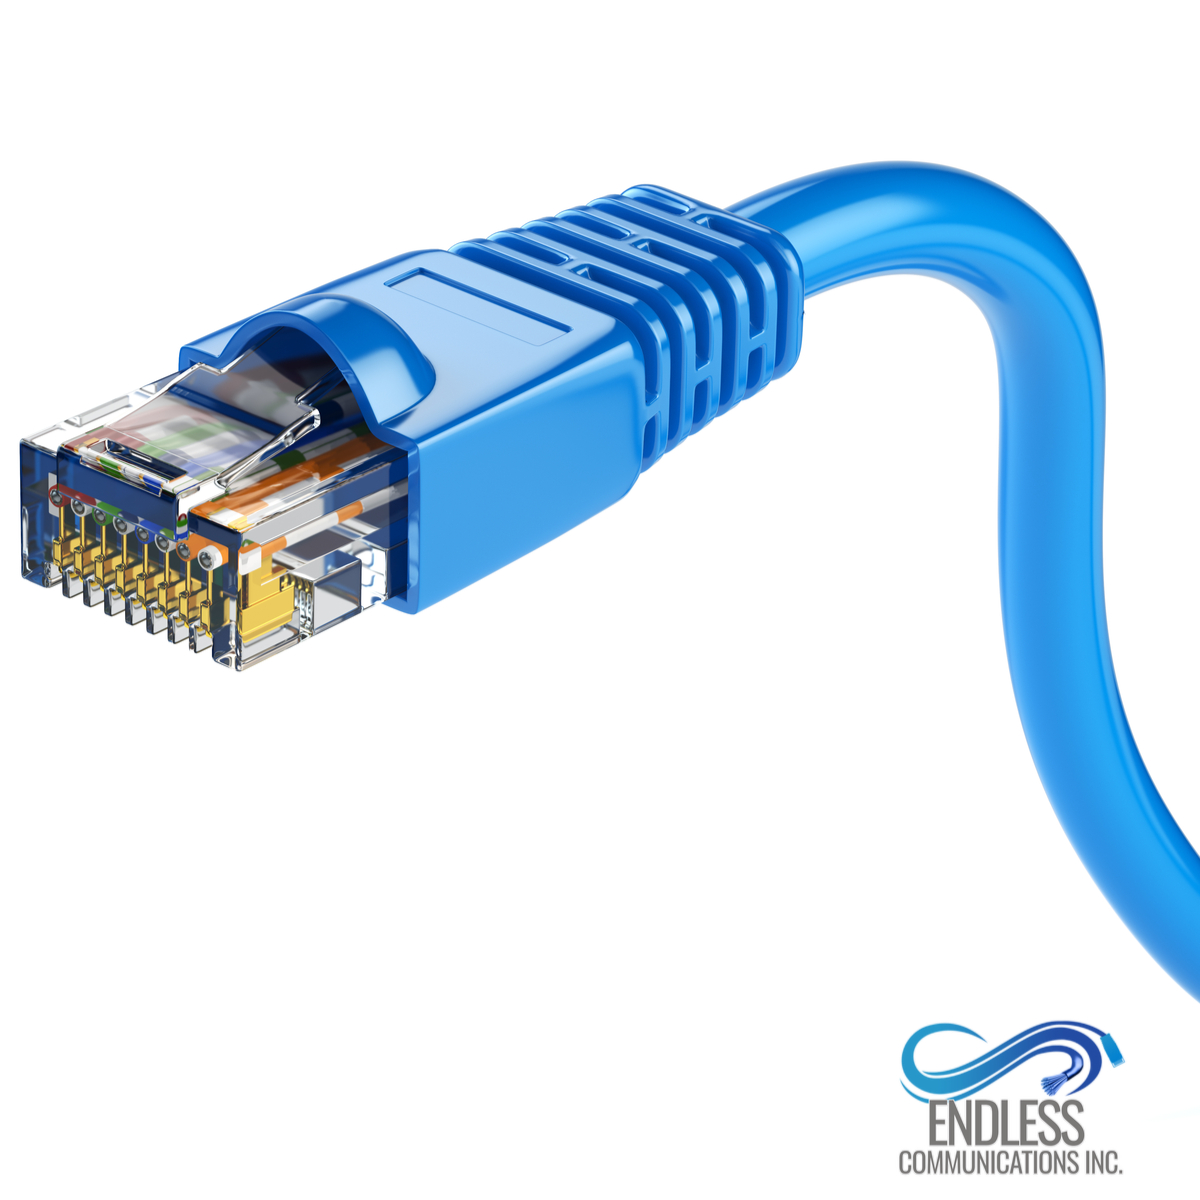 Do You Have Questions About Audio & Video Cabling In Laguna Hills?